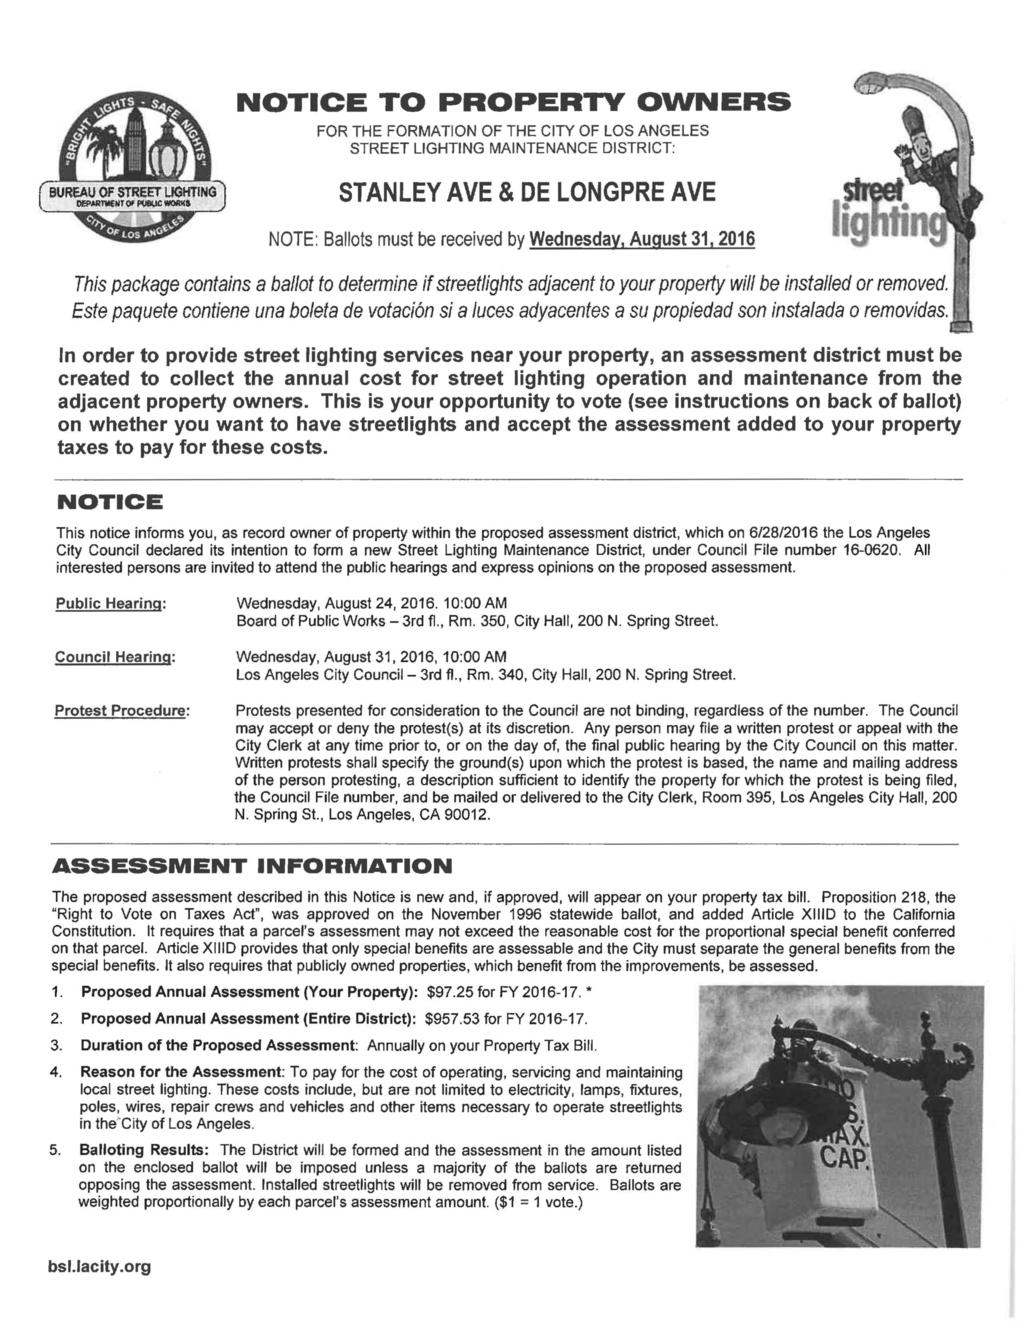 NOTICE TO PROPERTY OWNERS f FOR THE FORMATION OF THE CITY OF LOS ANGELES STREET LIGHTING MAINTENANCE DISTRICT: II BUREAU OF STREET LIGHTING ob>*rt*iskt gf pveuc STANLEY AVE & DE LONGPRE AVE NOTE: